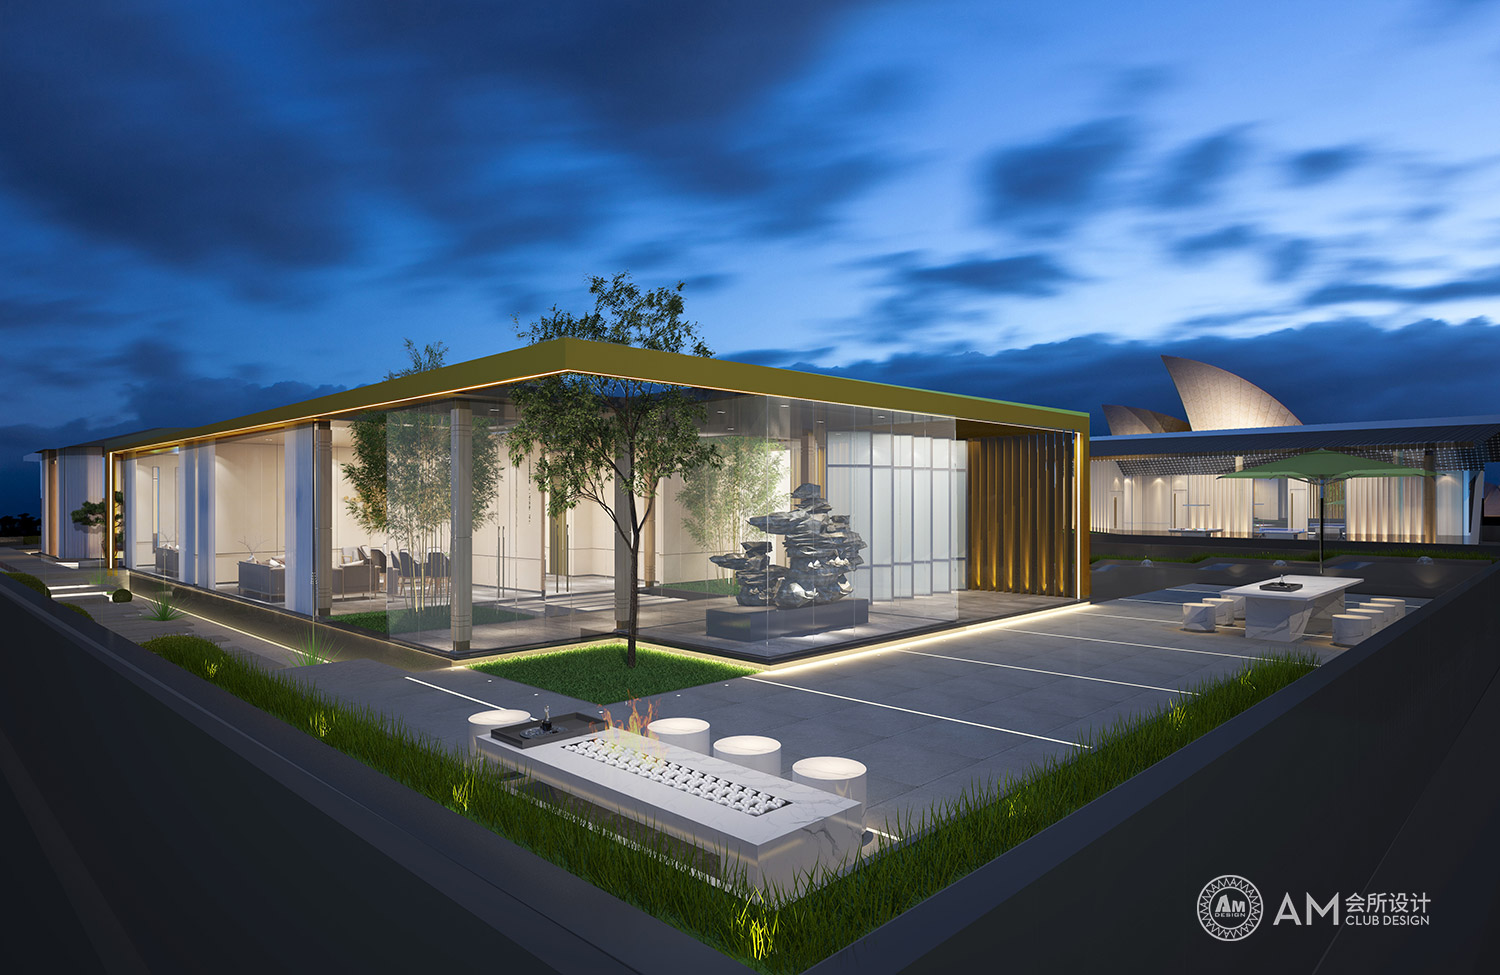 AM DESIGN | Architectural appearance design of enterprise club in Aobei science and Technology Park